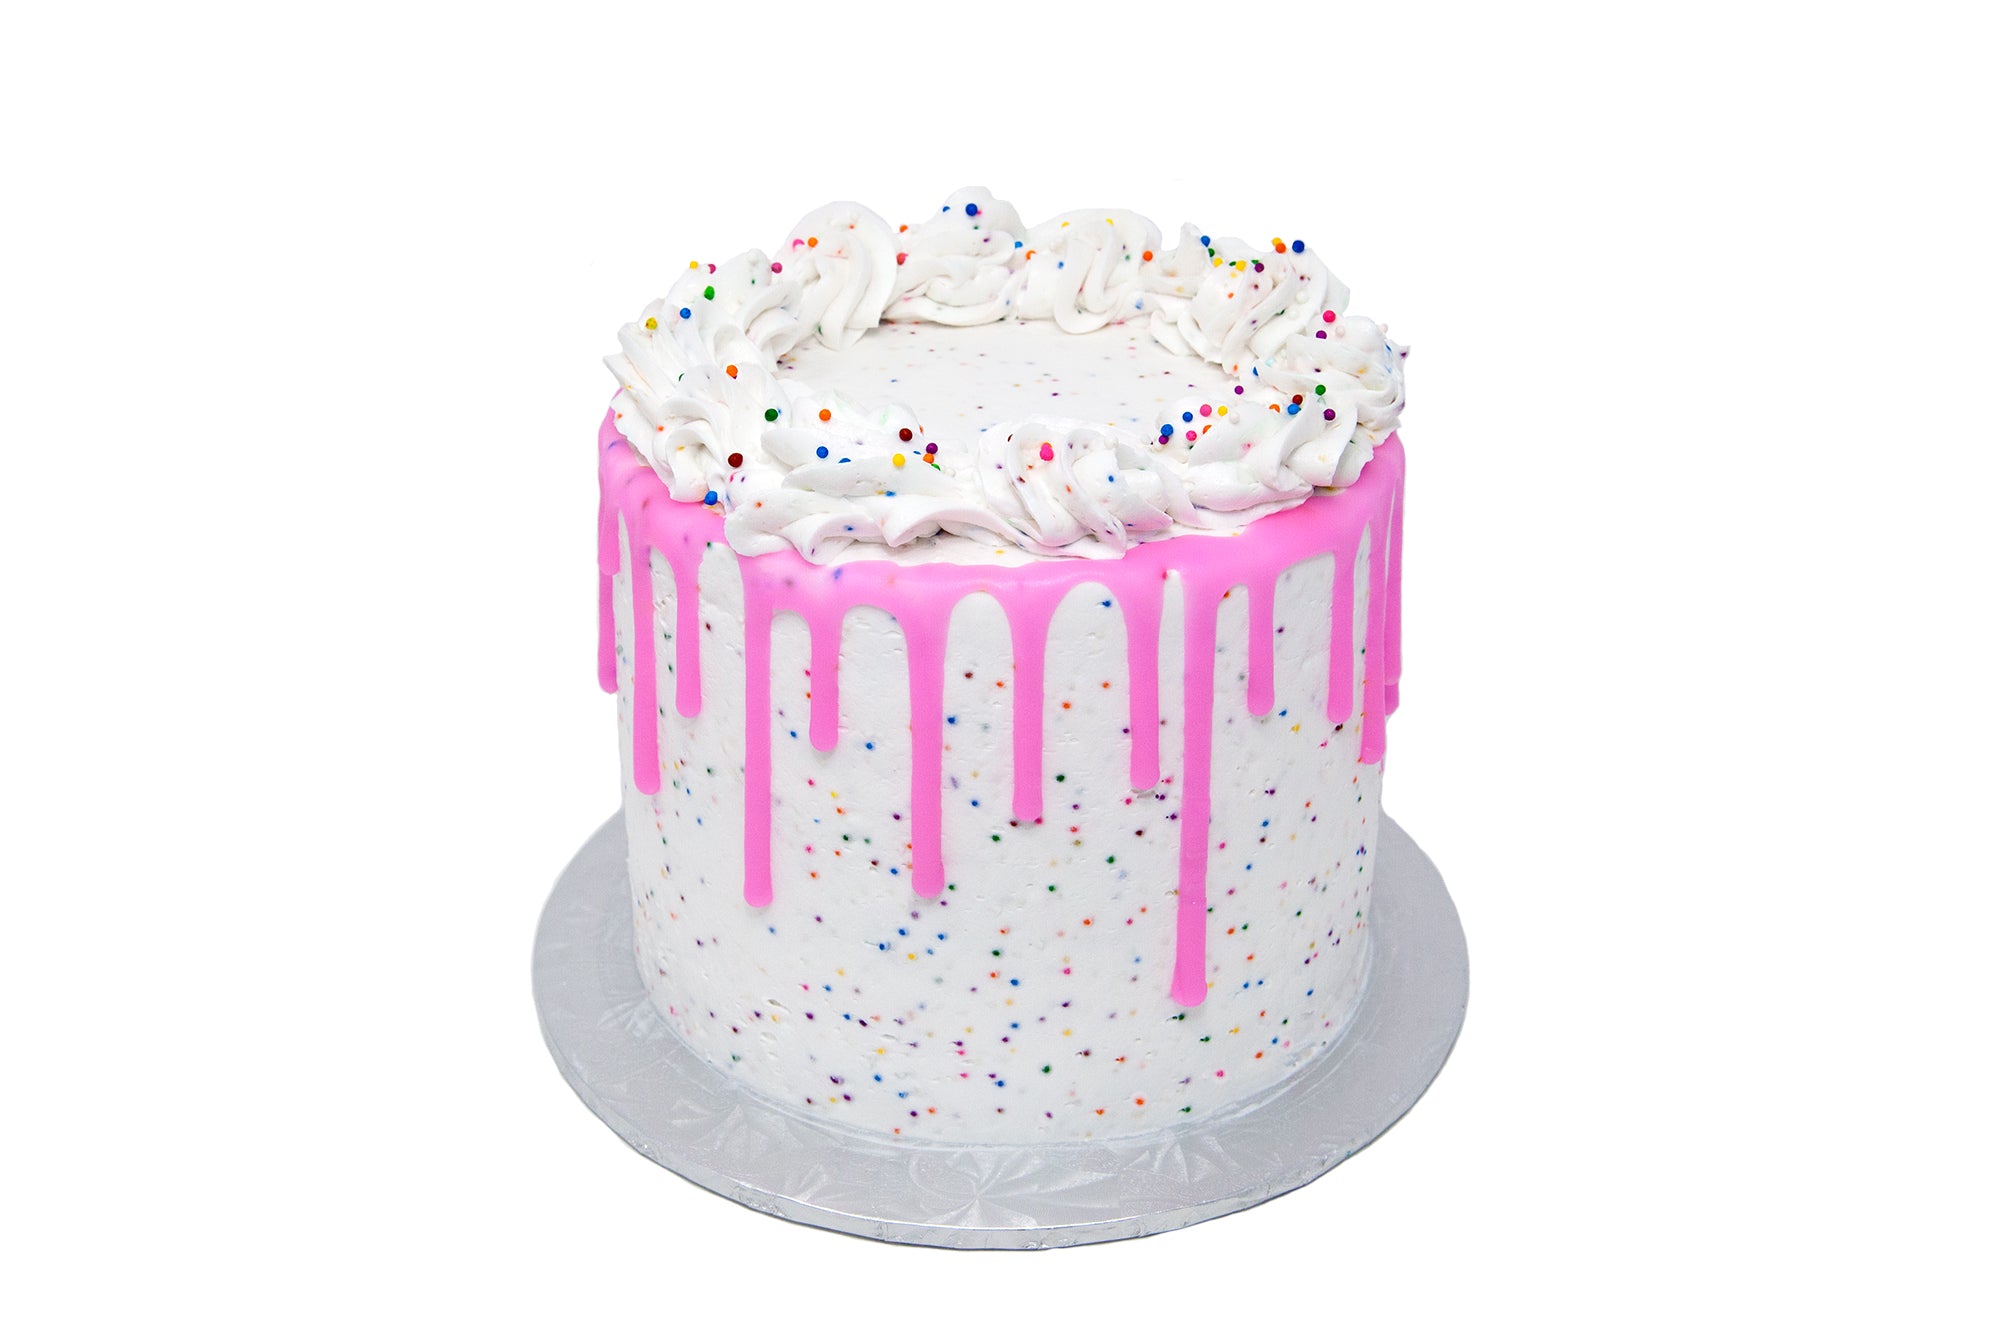 Rainbow Sprinkle Funfetti Cake - Once Upon a Chef